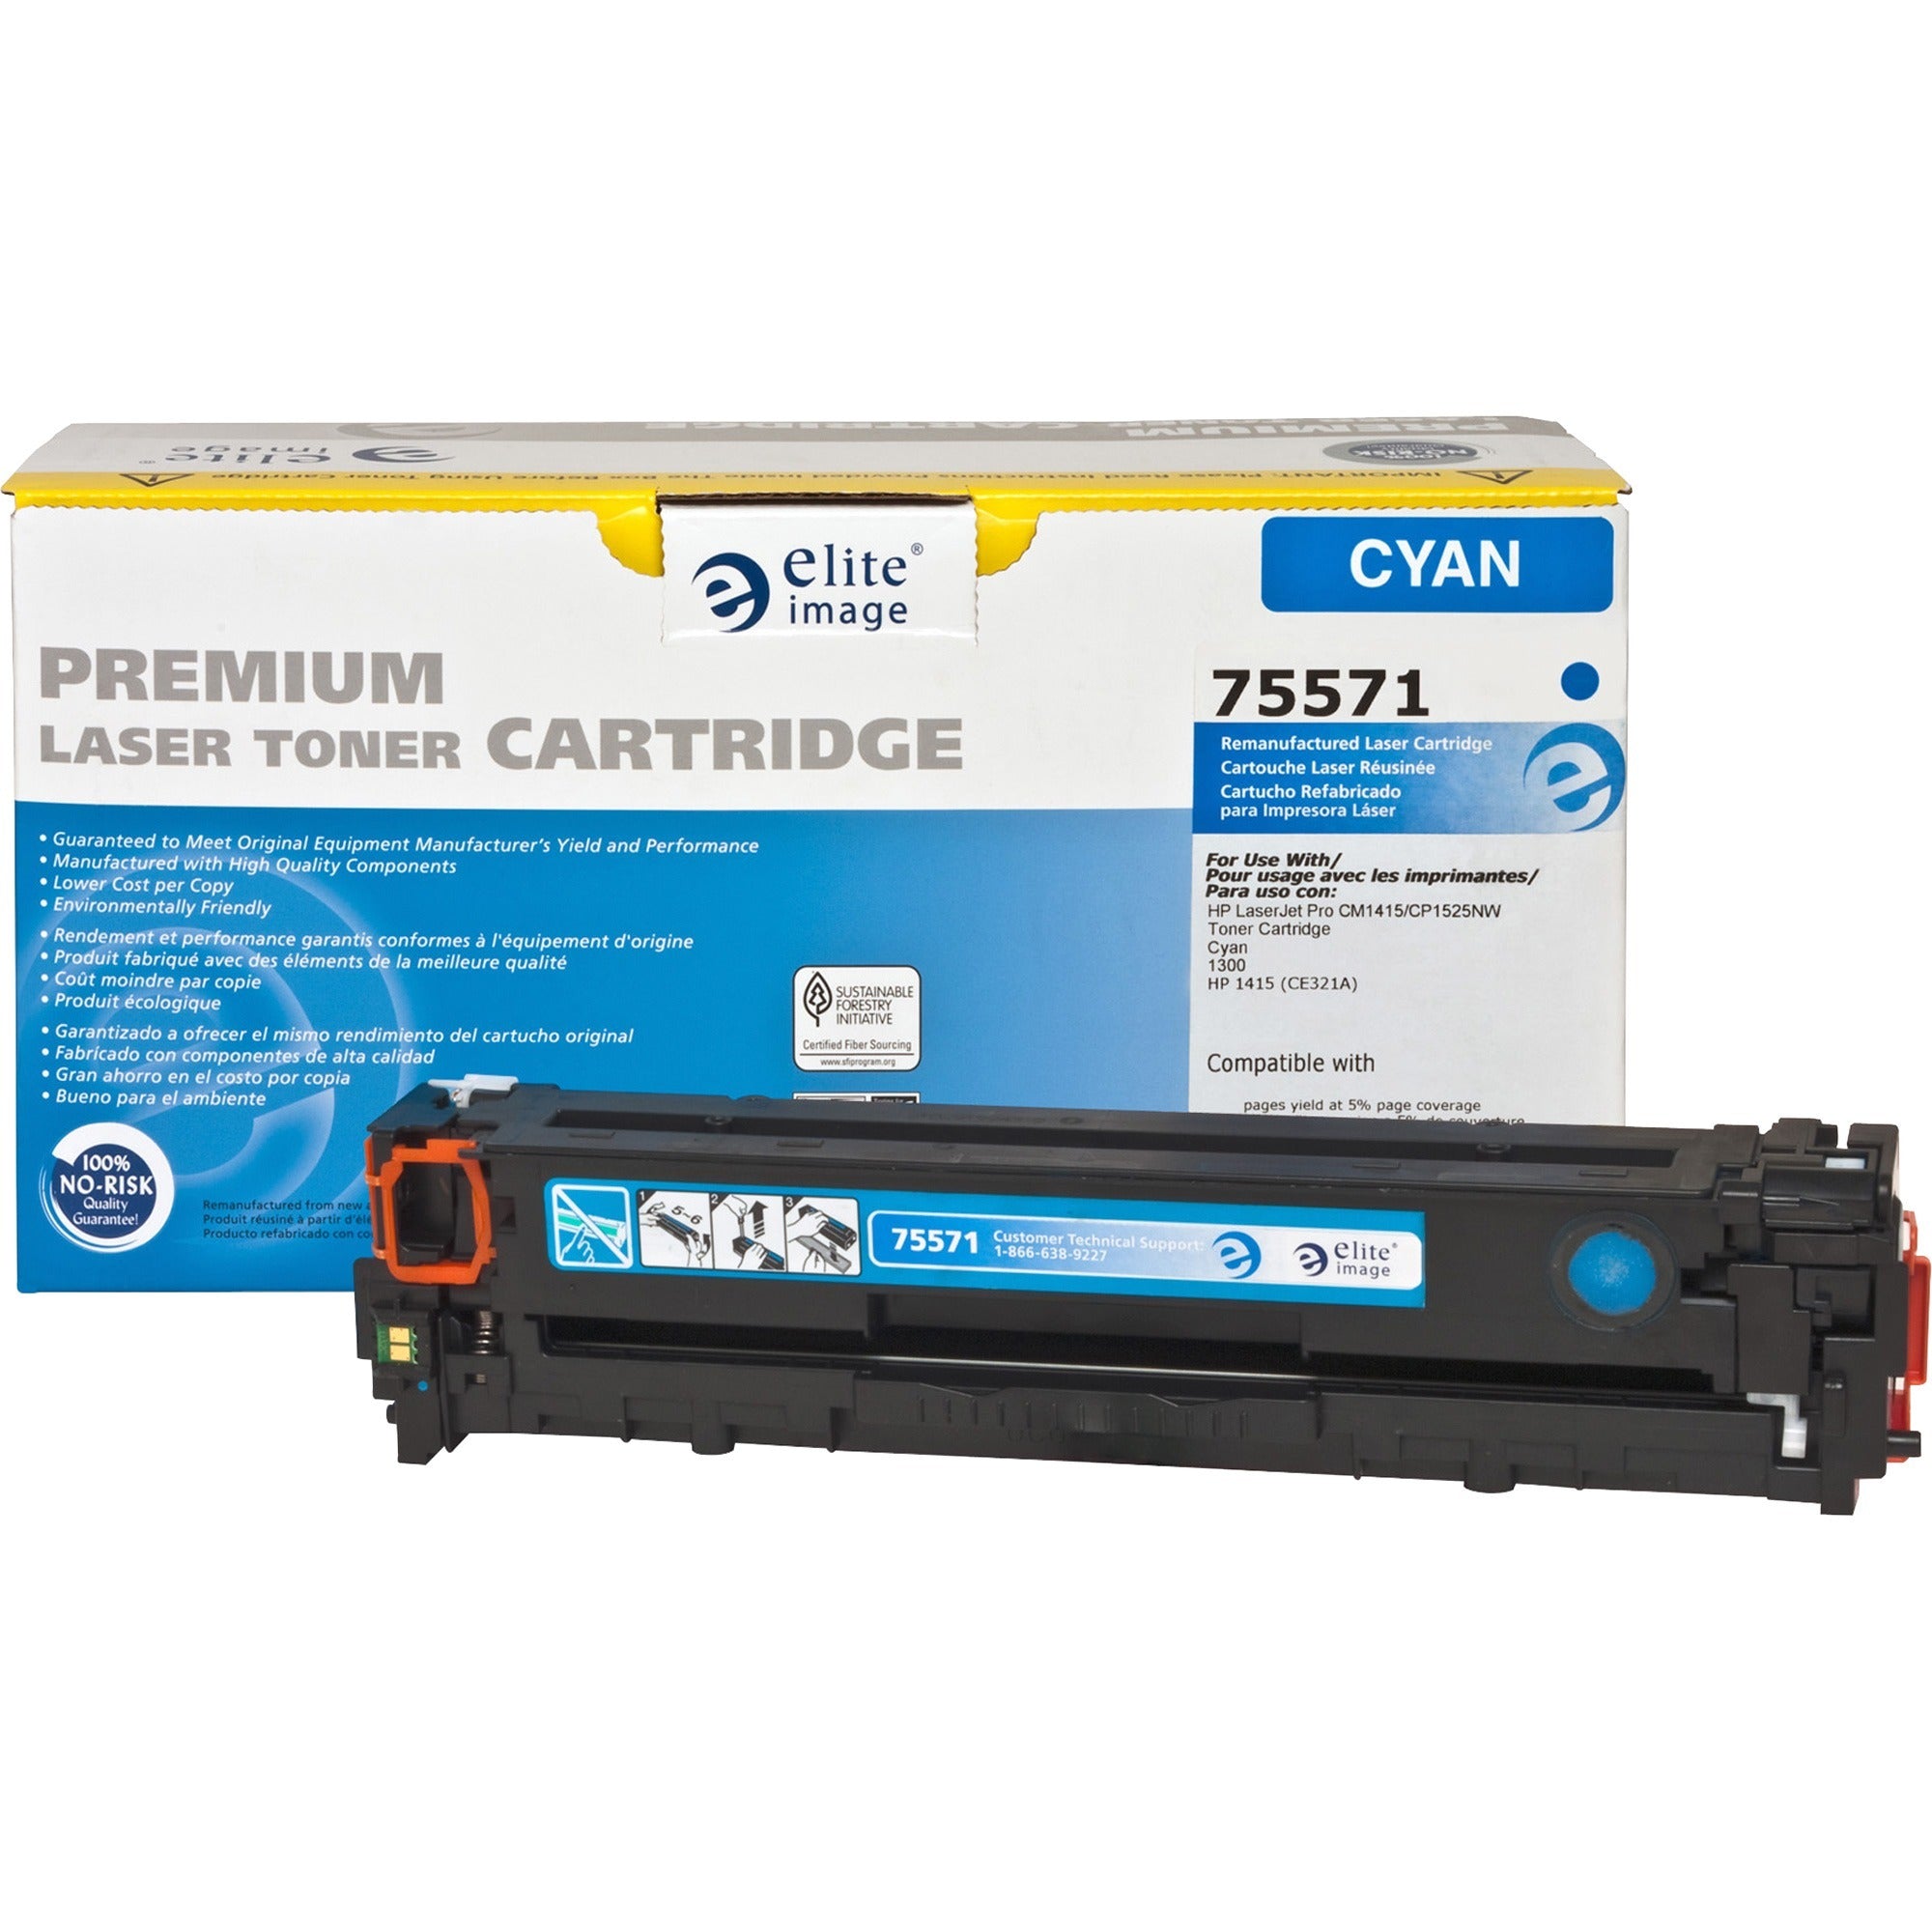 Elite Image Remanufactured Laser Toner Cartridge - Alternative for HP 128A (CE321A) - Cyan - 1 Each - 1300 Pages - 1